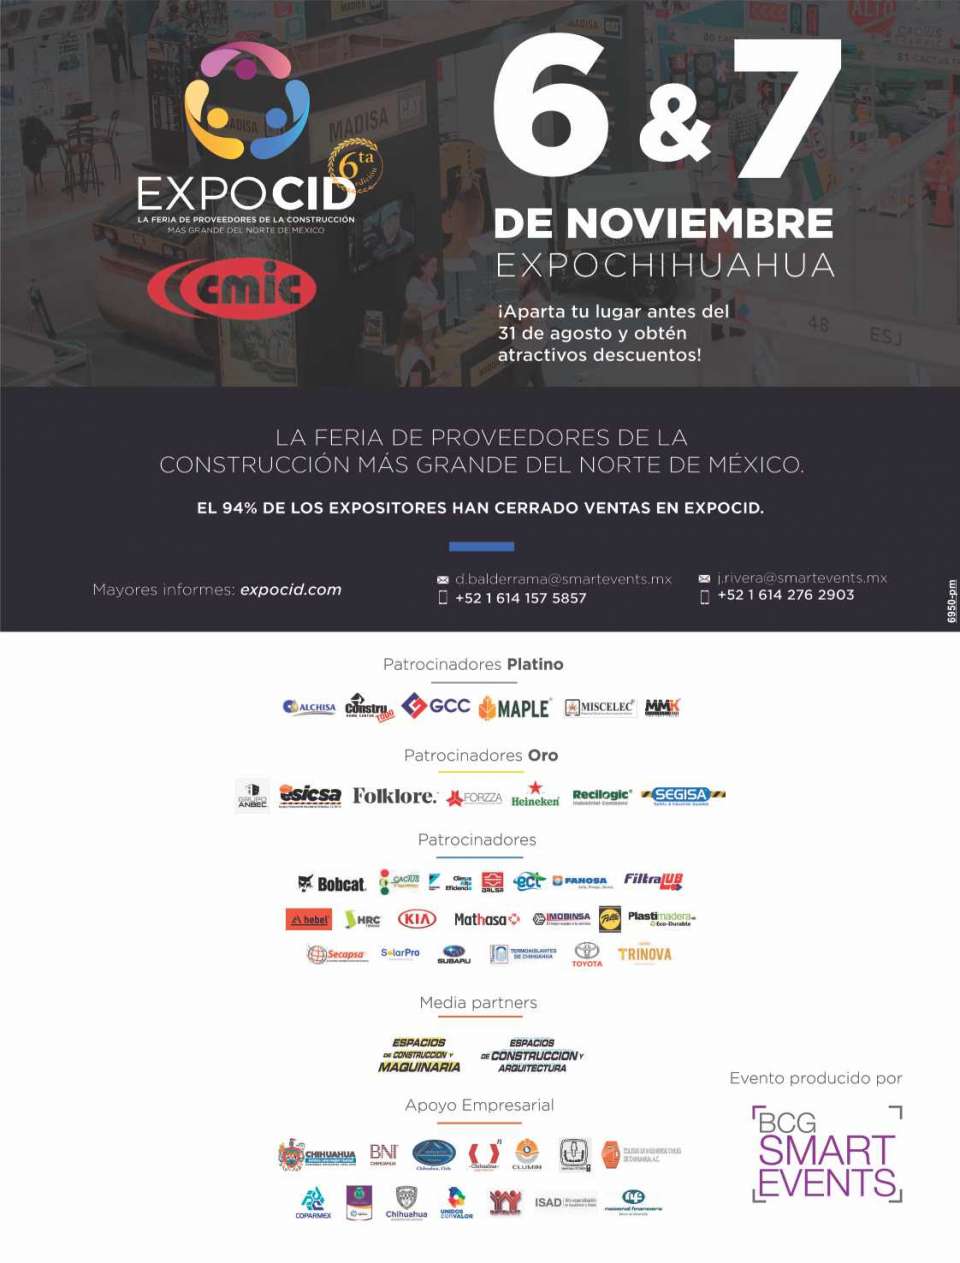 EXPOCID - The Largest Construction Suppliers Fair in Northern Mexico, from November 6 to 7, 2019 at ExpoChihuahua.